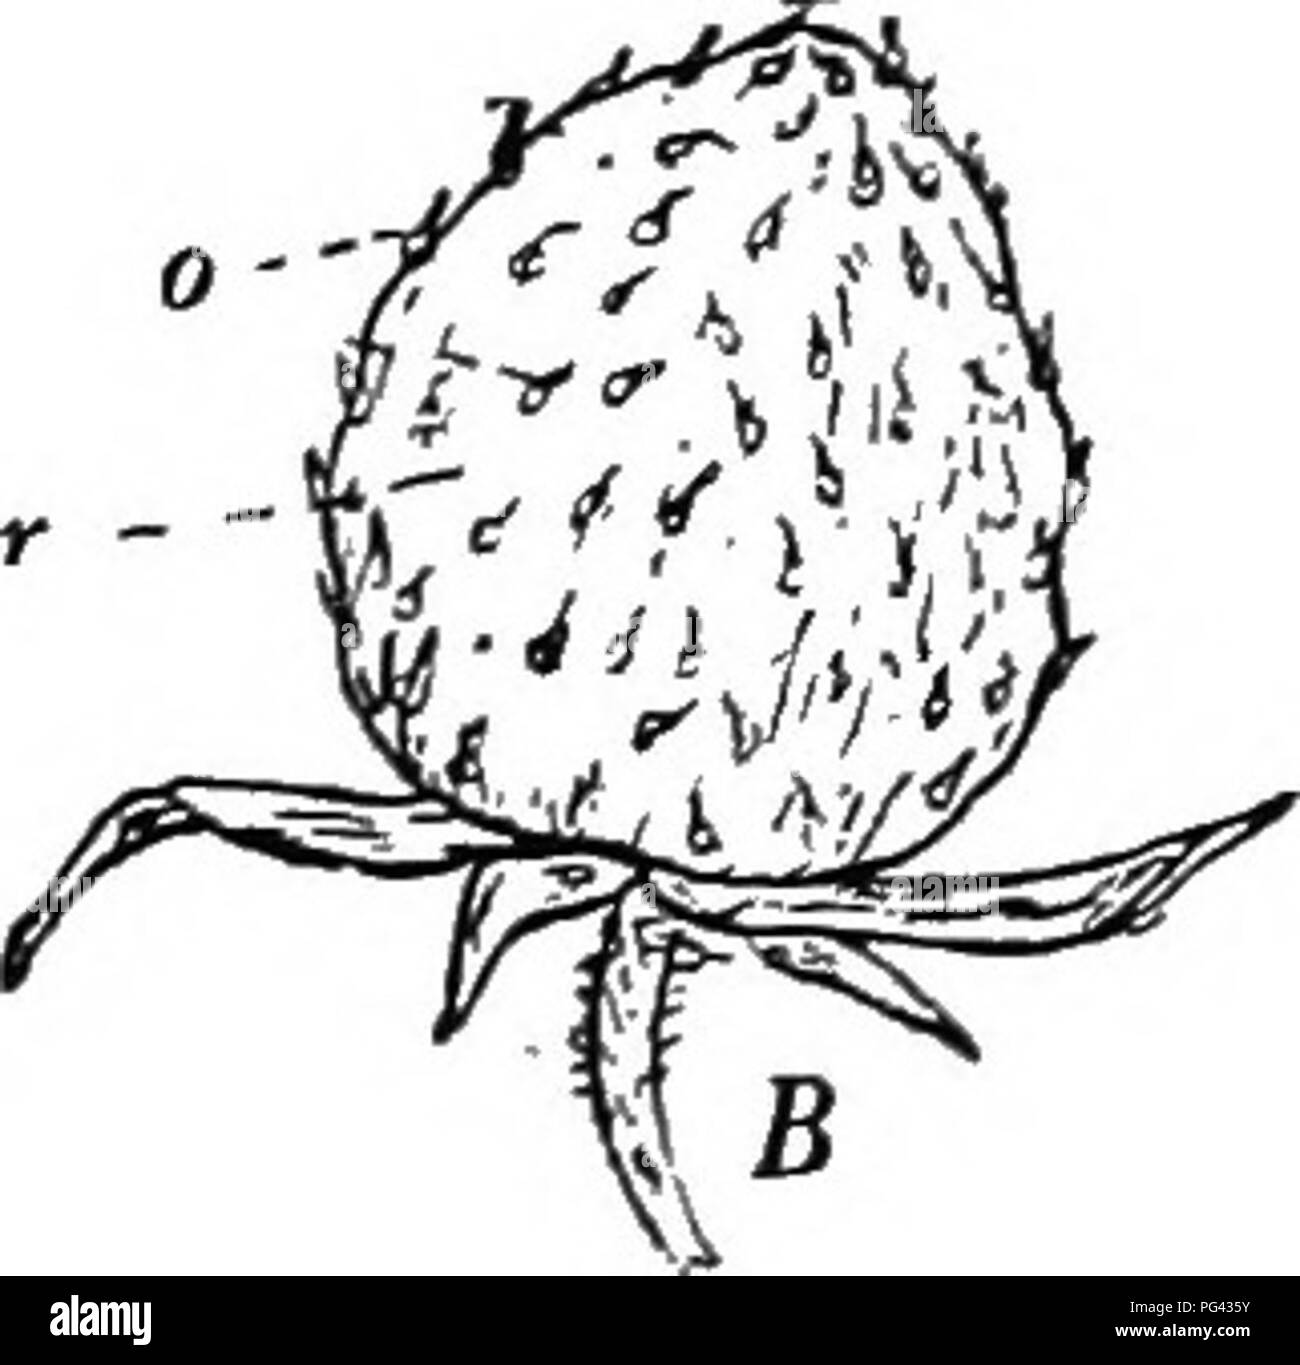 . Botany for agricultural students . Botany. ' Fig. 79. — Flower and fruit of Strawberry. A, section through flower, showing the fleshy receptacle (r) and the many pistils (p) on its surface. B, fruit consisting of enlarged receptacle (r), bearing the small hard ovaries (o). which they are closely joined form the rind. {Fig. 78.) The placentas are more or less fleshy and in case of the Watermelon, where they form large juicy lobes, they constitute the bulk of the edible portion. In most cases, however, as Muskmelons and Pumpkins illustrate, the placentas break loose from the ovary wall and are Stock Photo